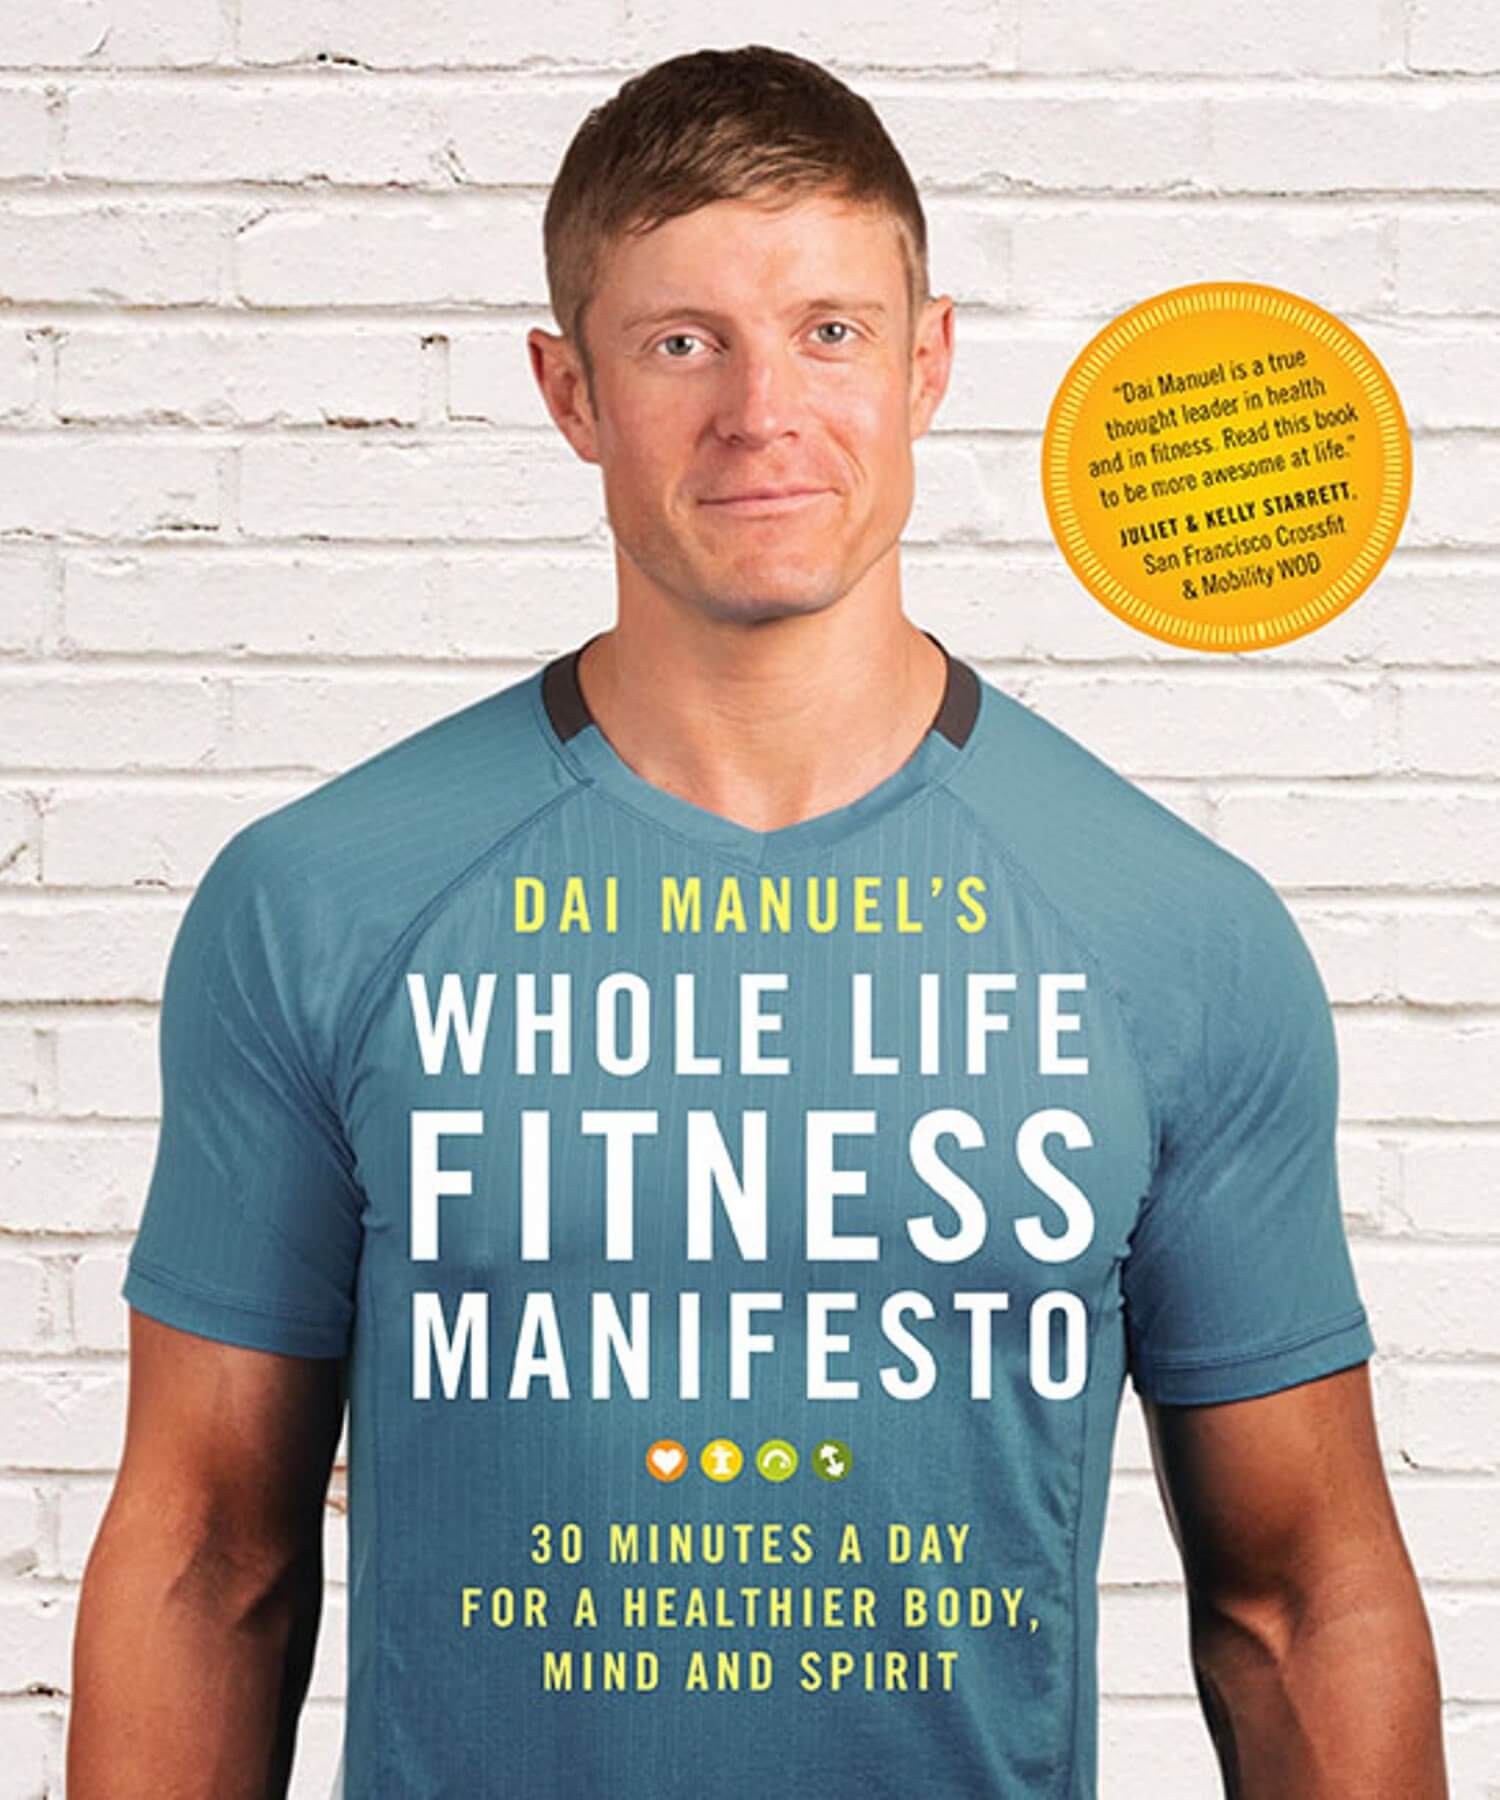 Whole Life Fitness Manifesto: 30 Minutes a Day for a Healthier Body, Mind and Spirit